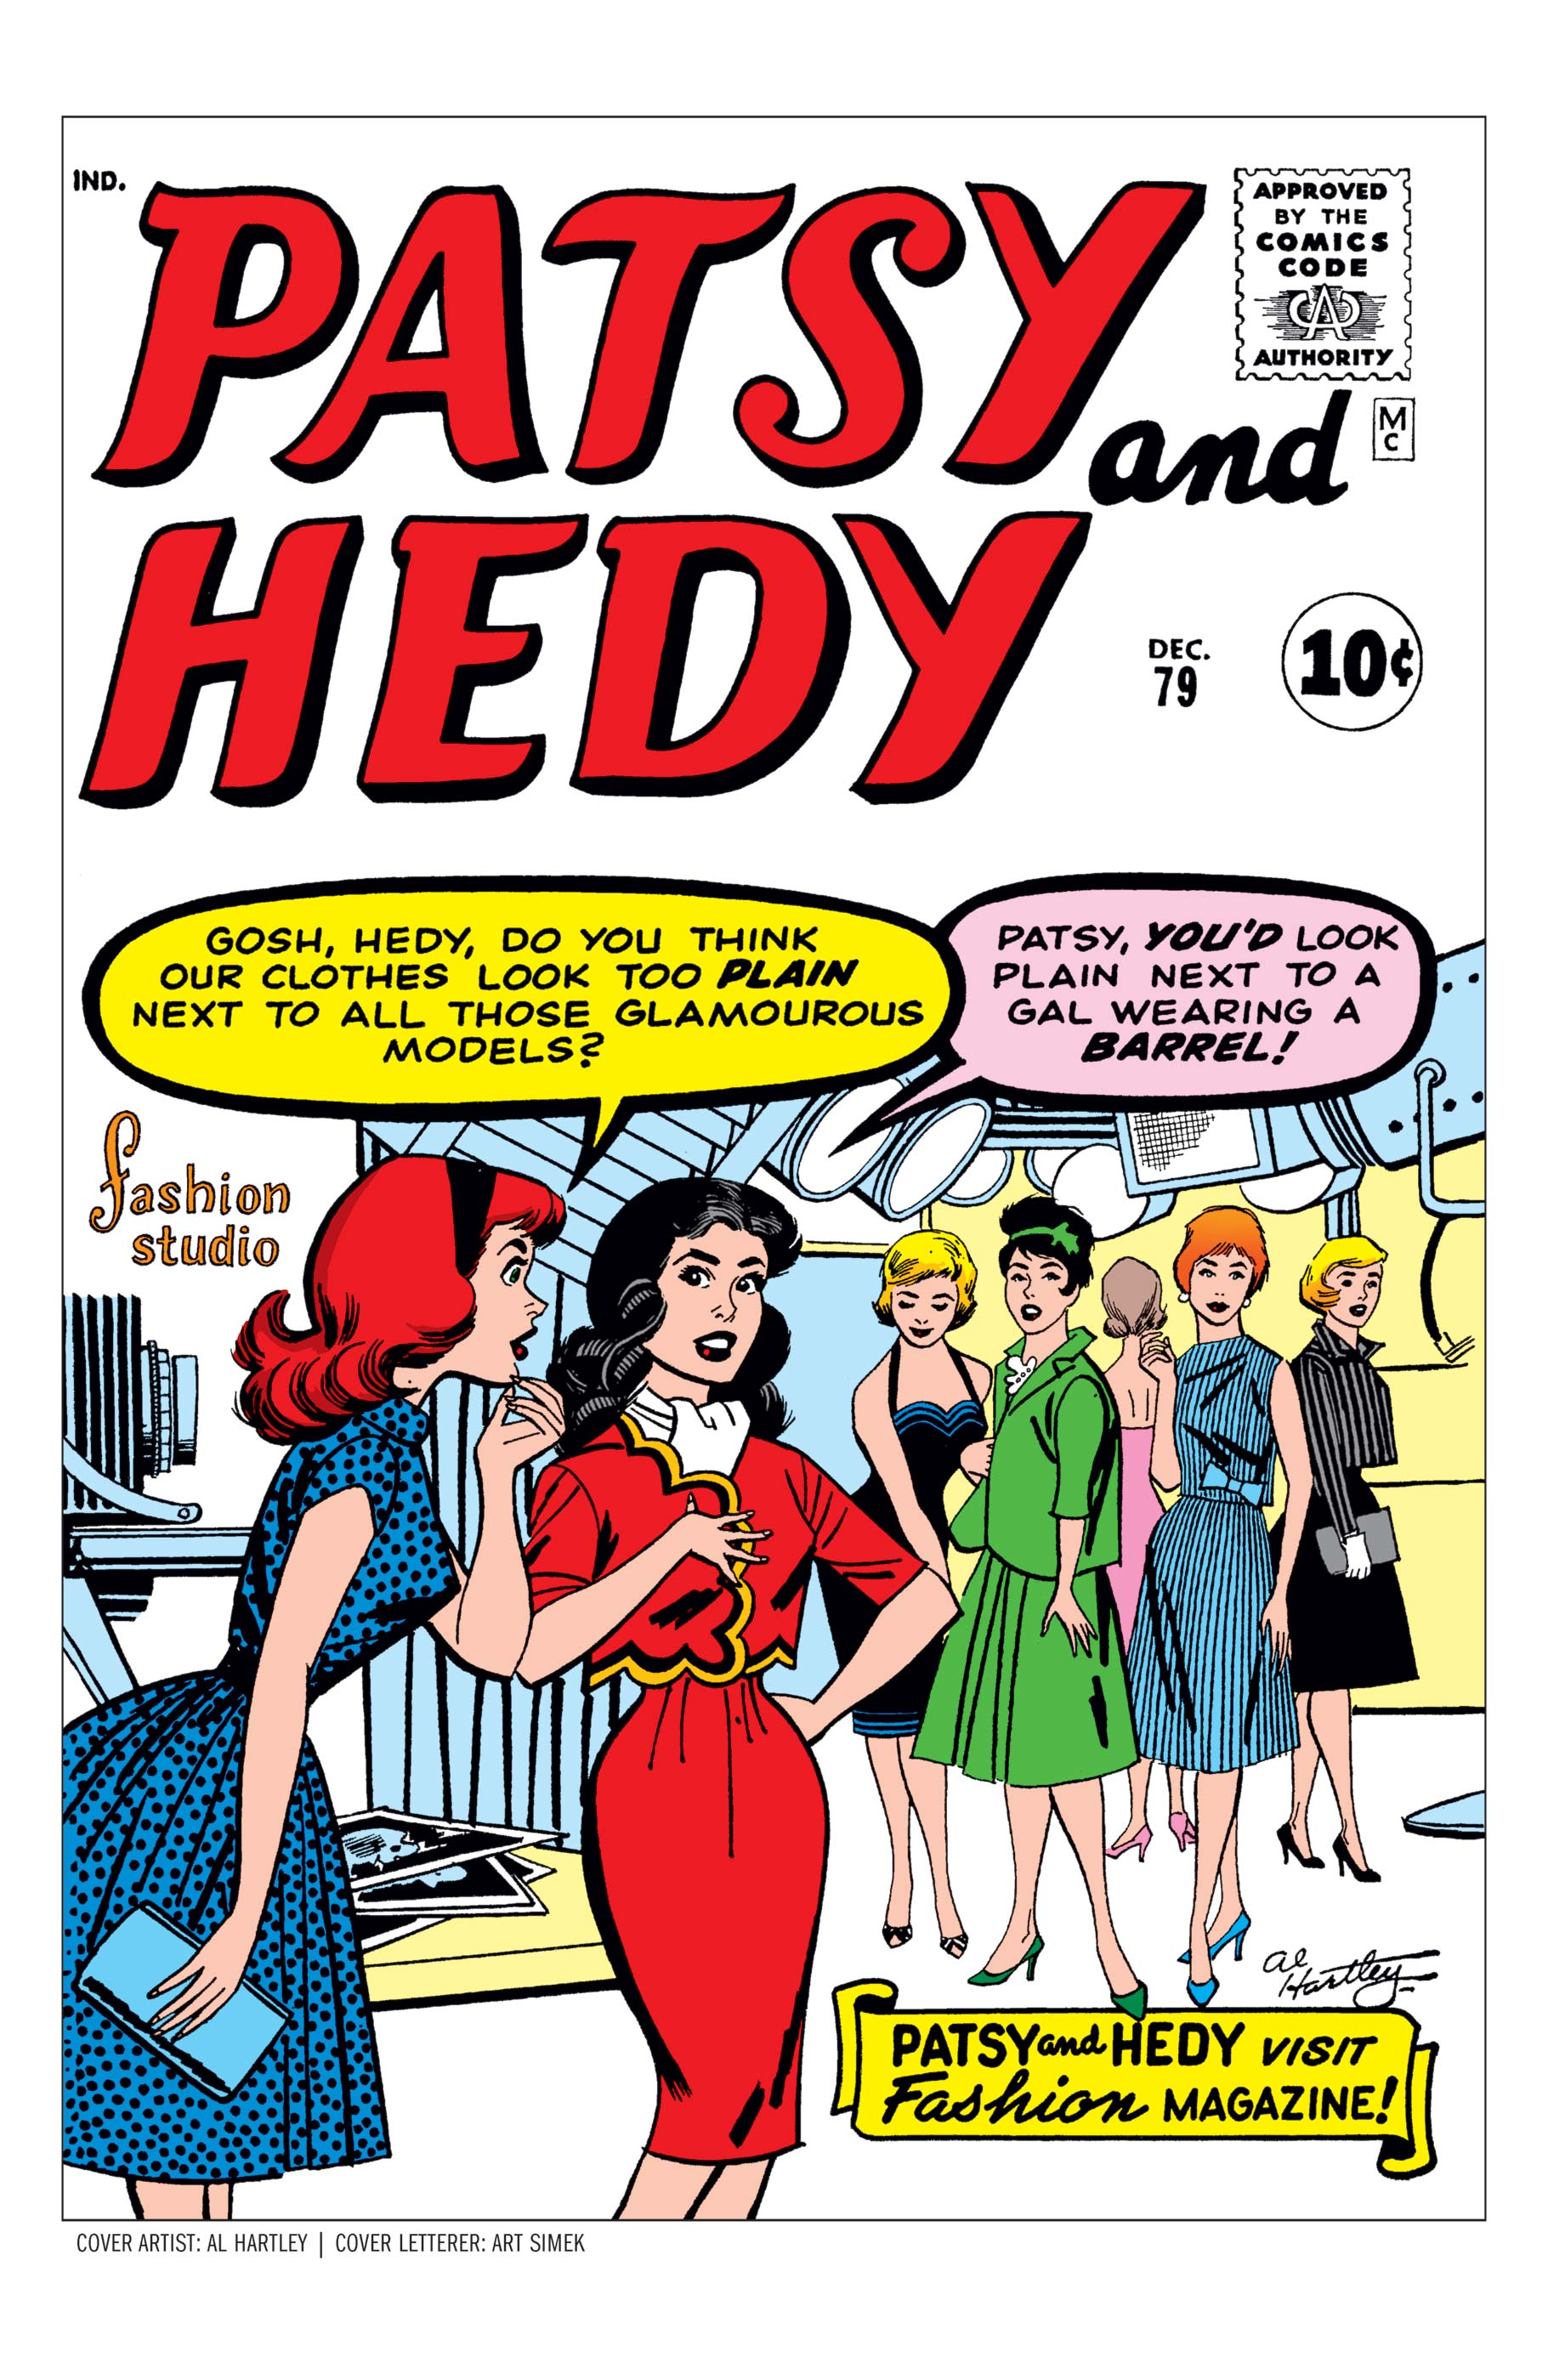 Patsy and Hedy (1952) #79